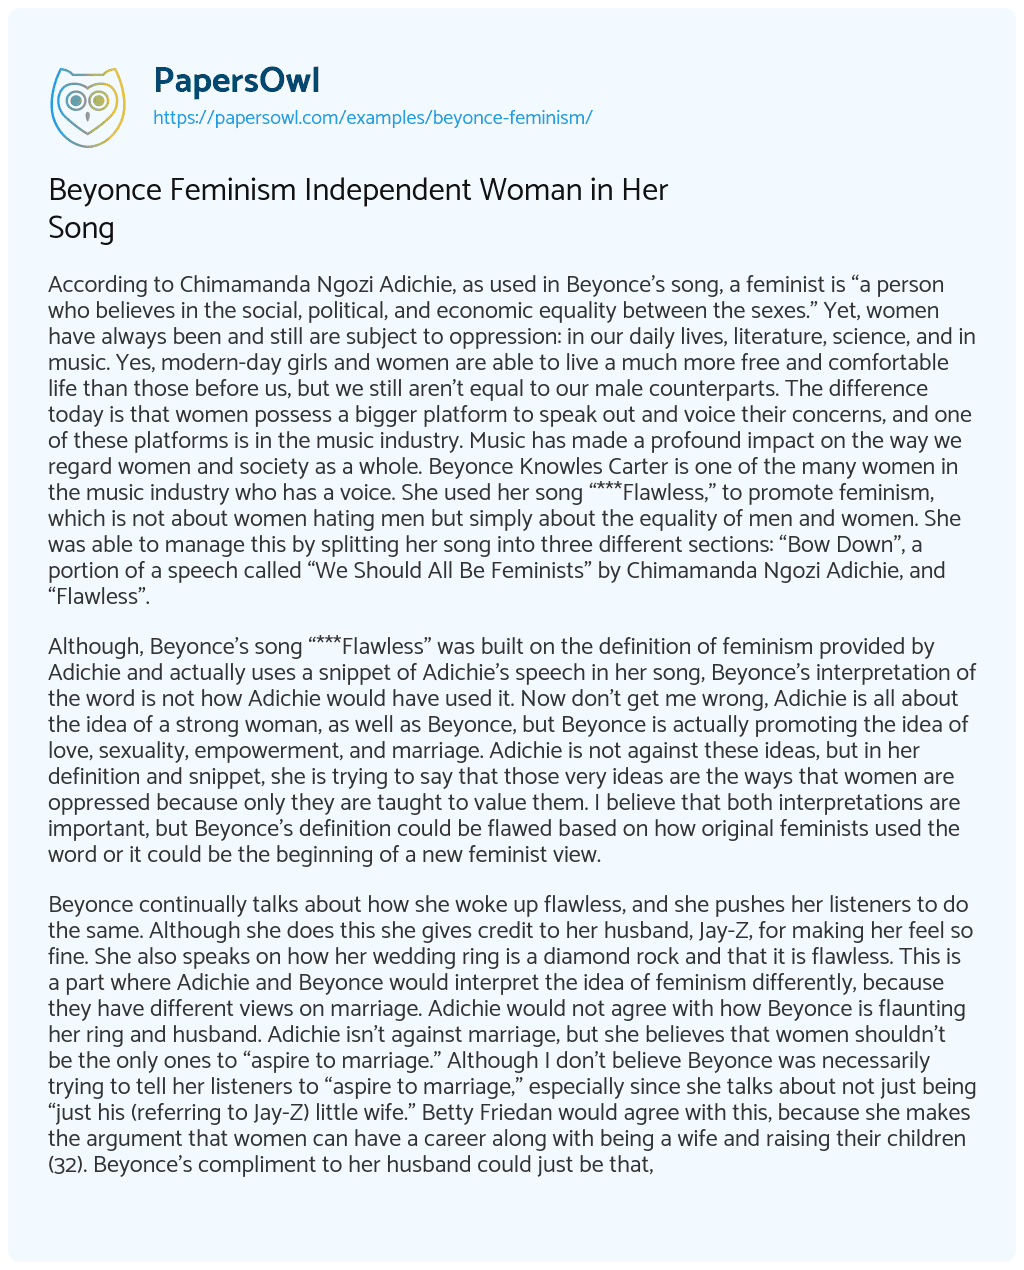 Essay on Beyonce Feminism Independent Woman in her Song